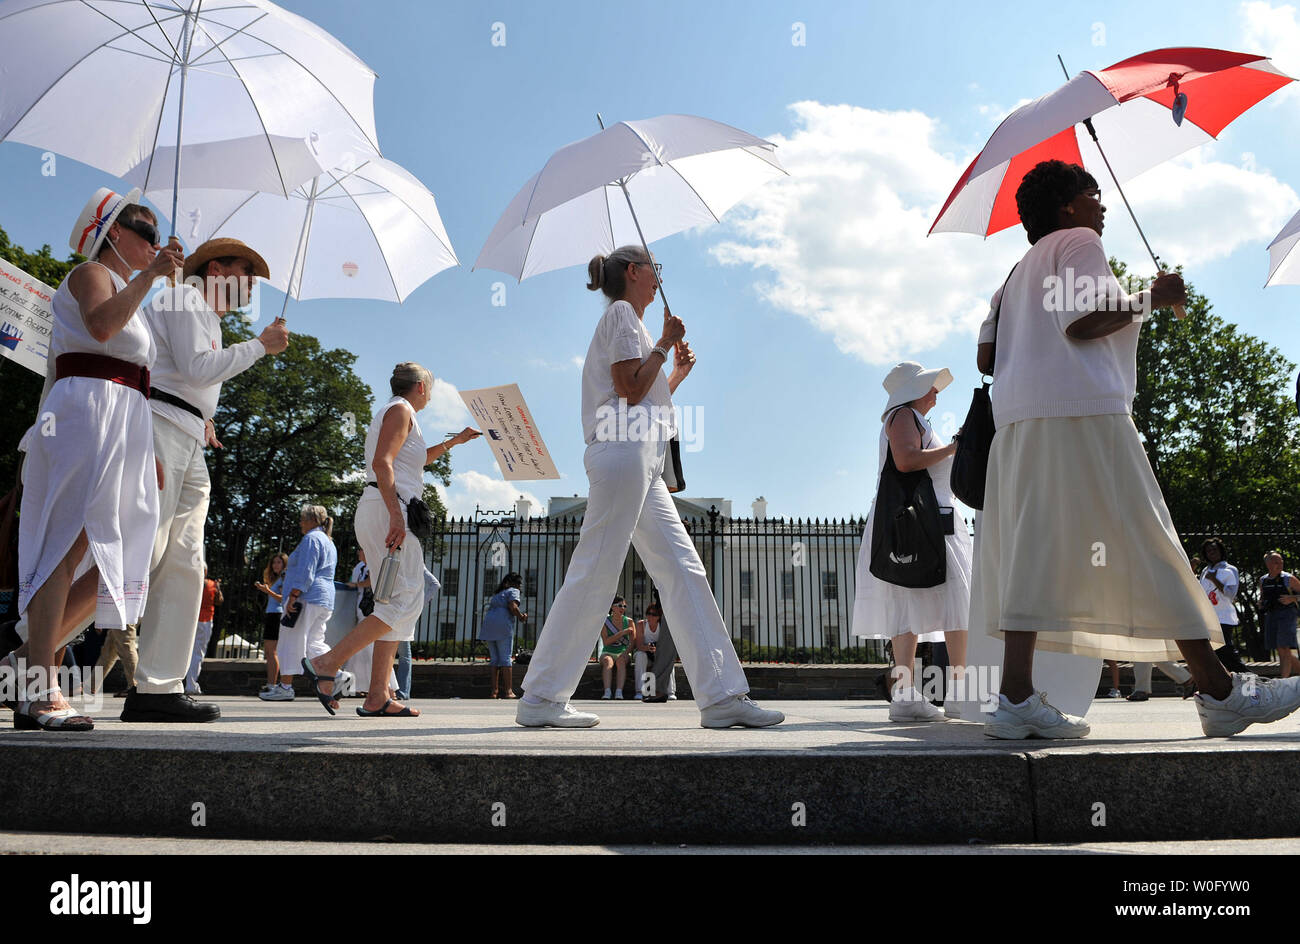 Members and supporters of the League of Women Voters and DC Vote hold a demonstration to protest the lack of voting rights for the citizens of Washington, D.C., on the 90th Anniversary of the 19th Amendment, guaranteeing women the right to vote, in front of the White House in Washington on August 26, 2010.   UPI/Kevin Dietsch Stock Photo